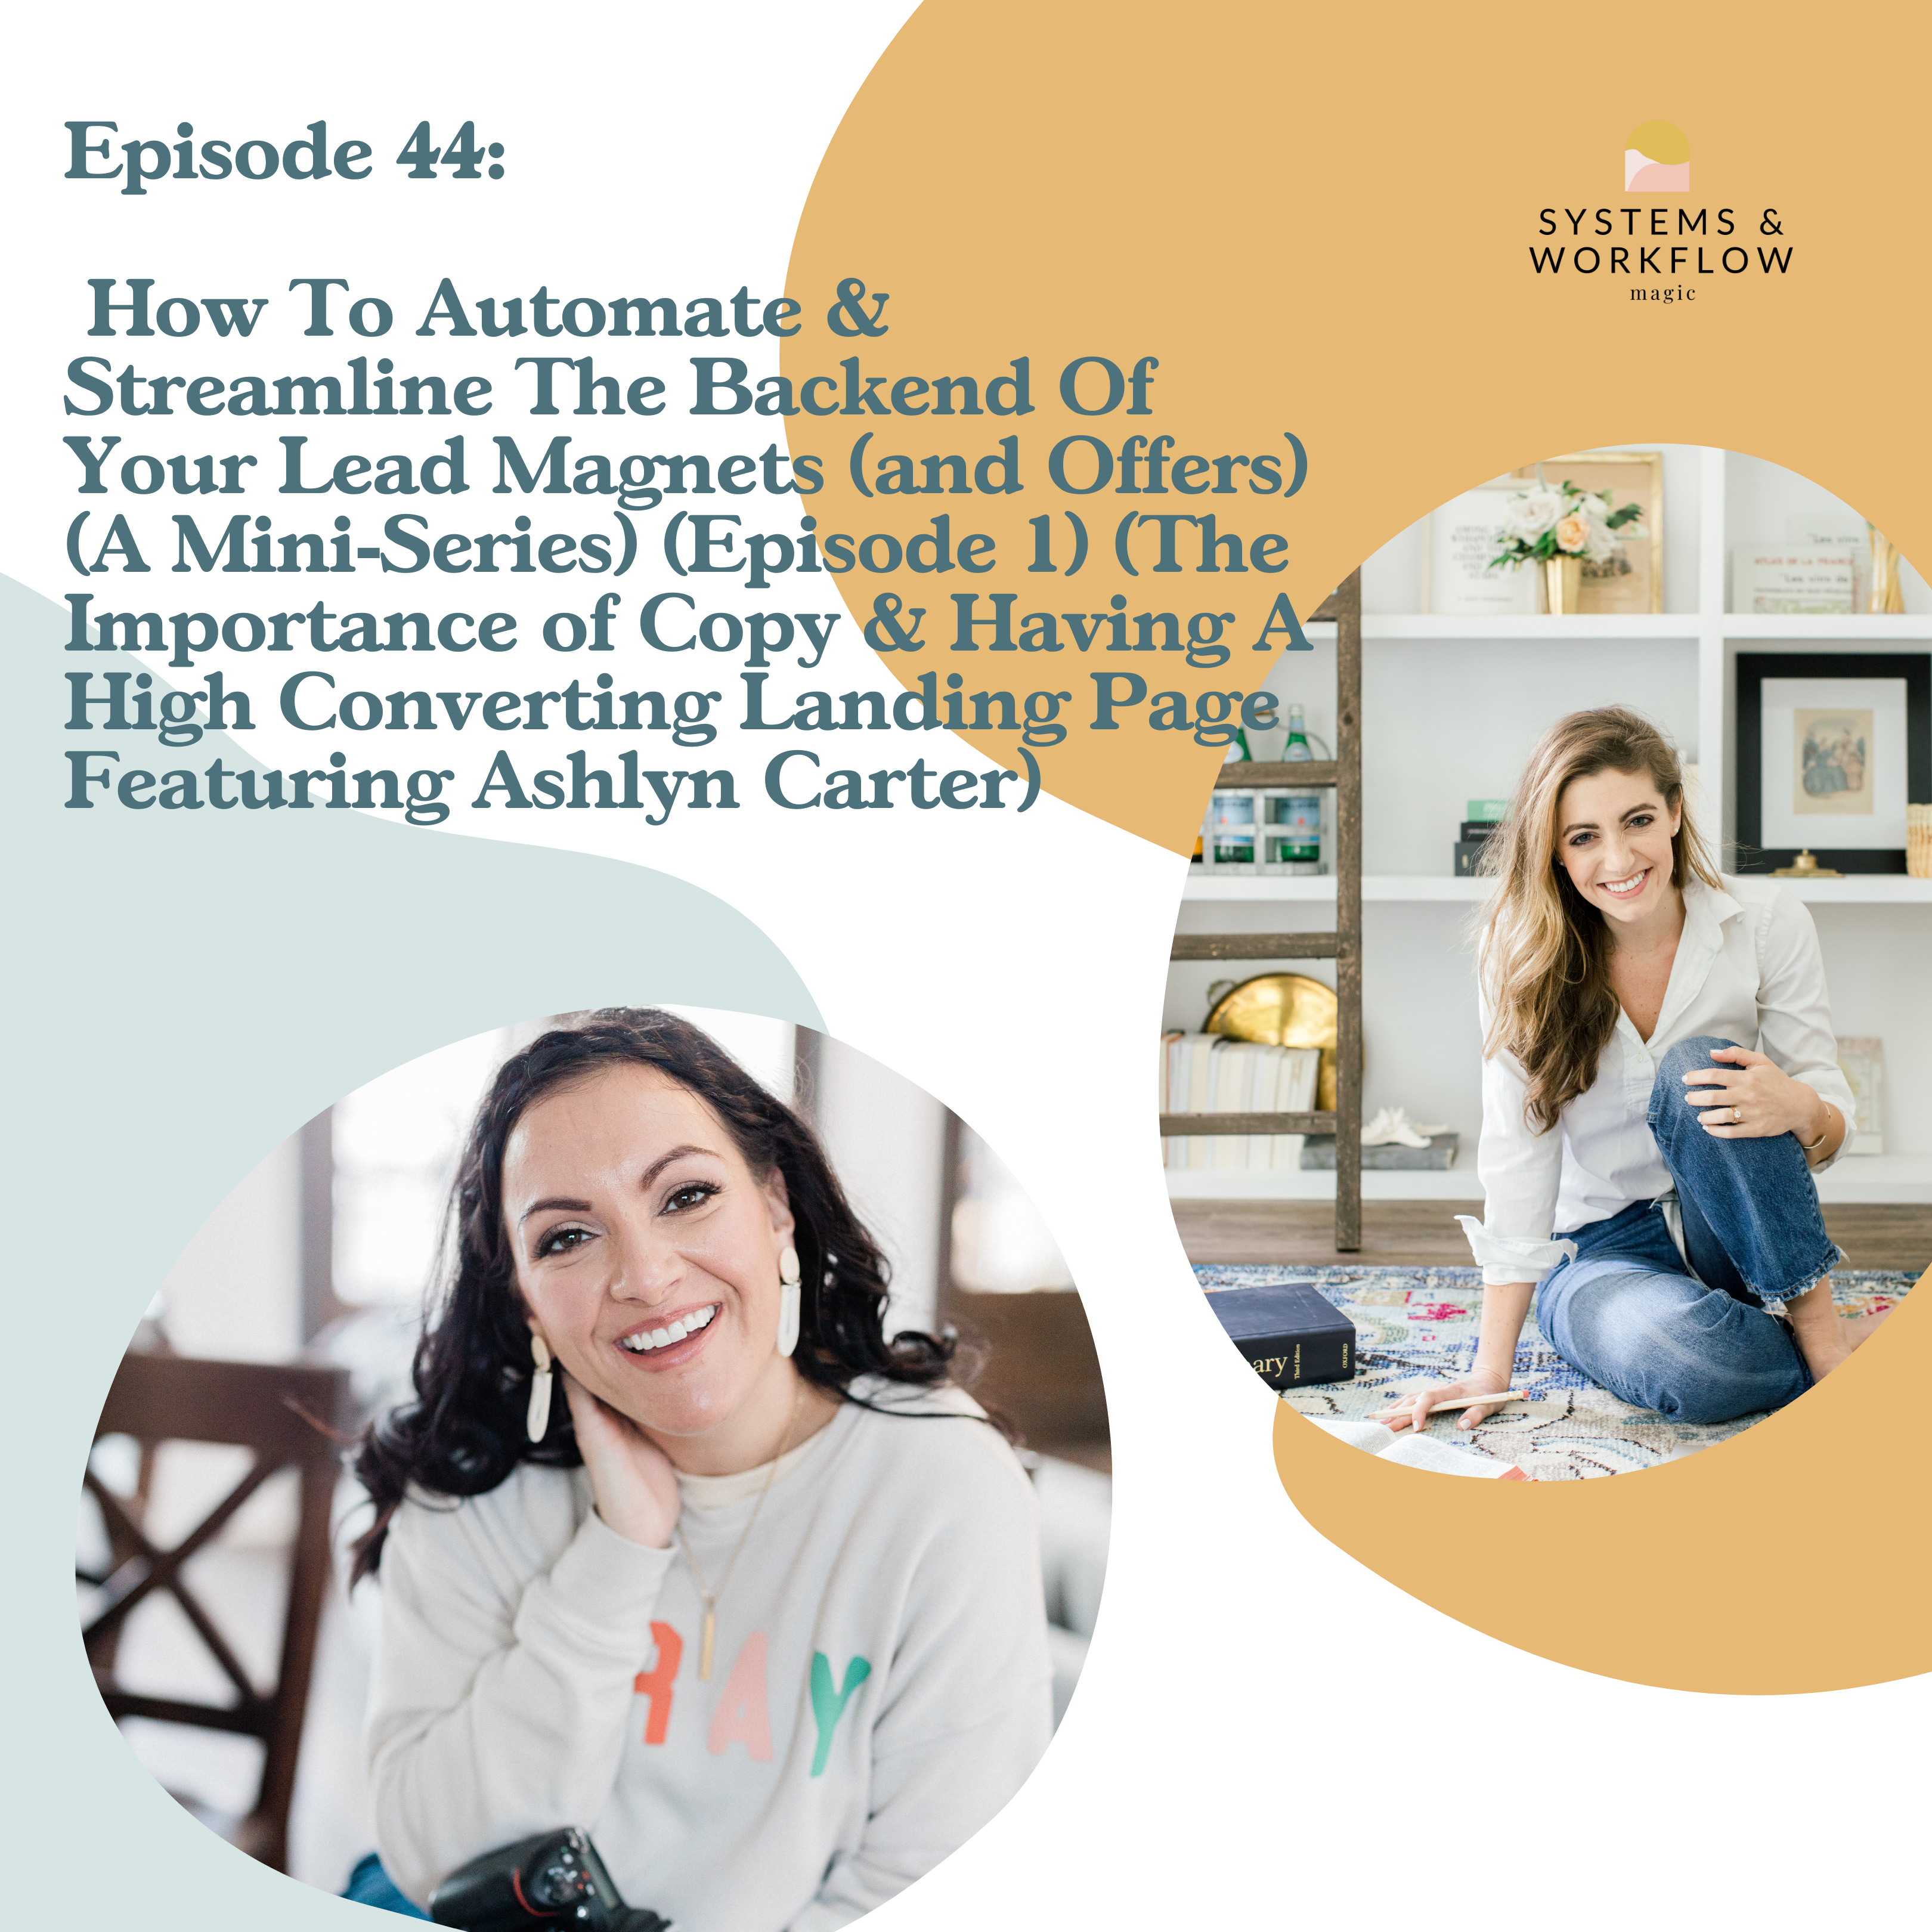 The Importance of Copy & Having A High Converting Landing Page Featuring Ashlyn Carter